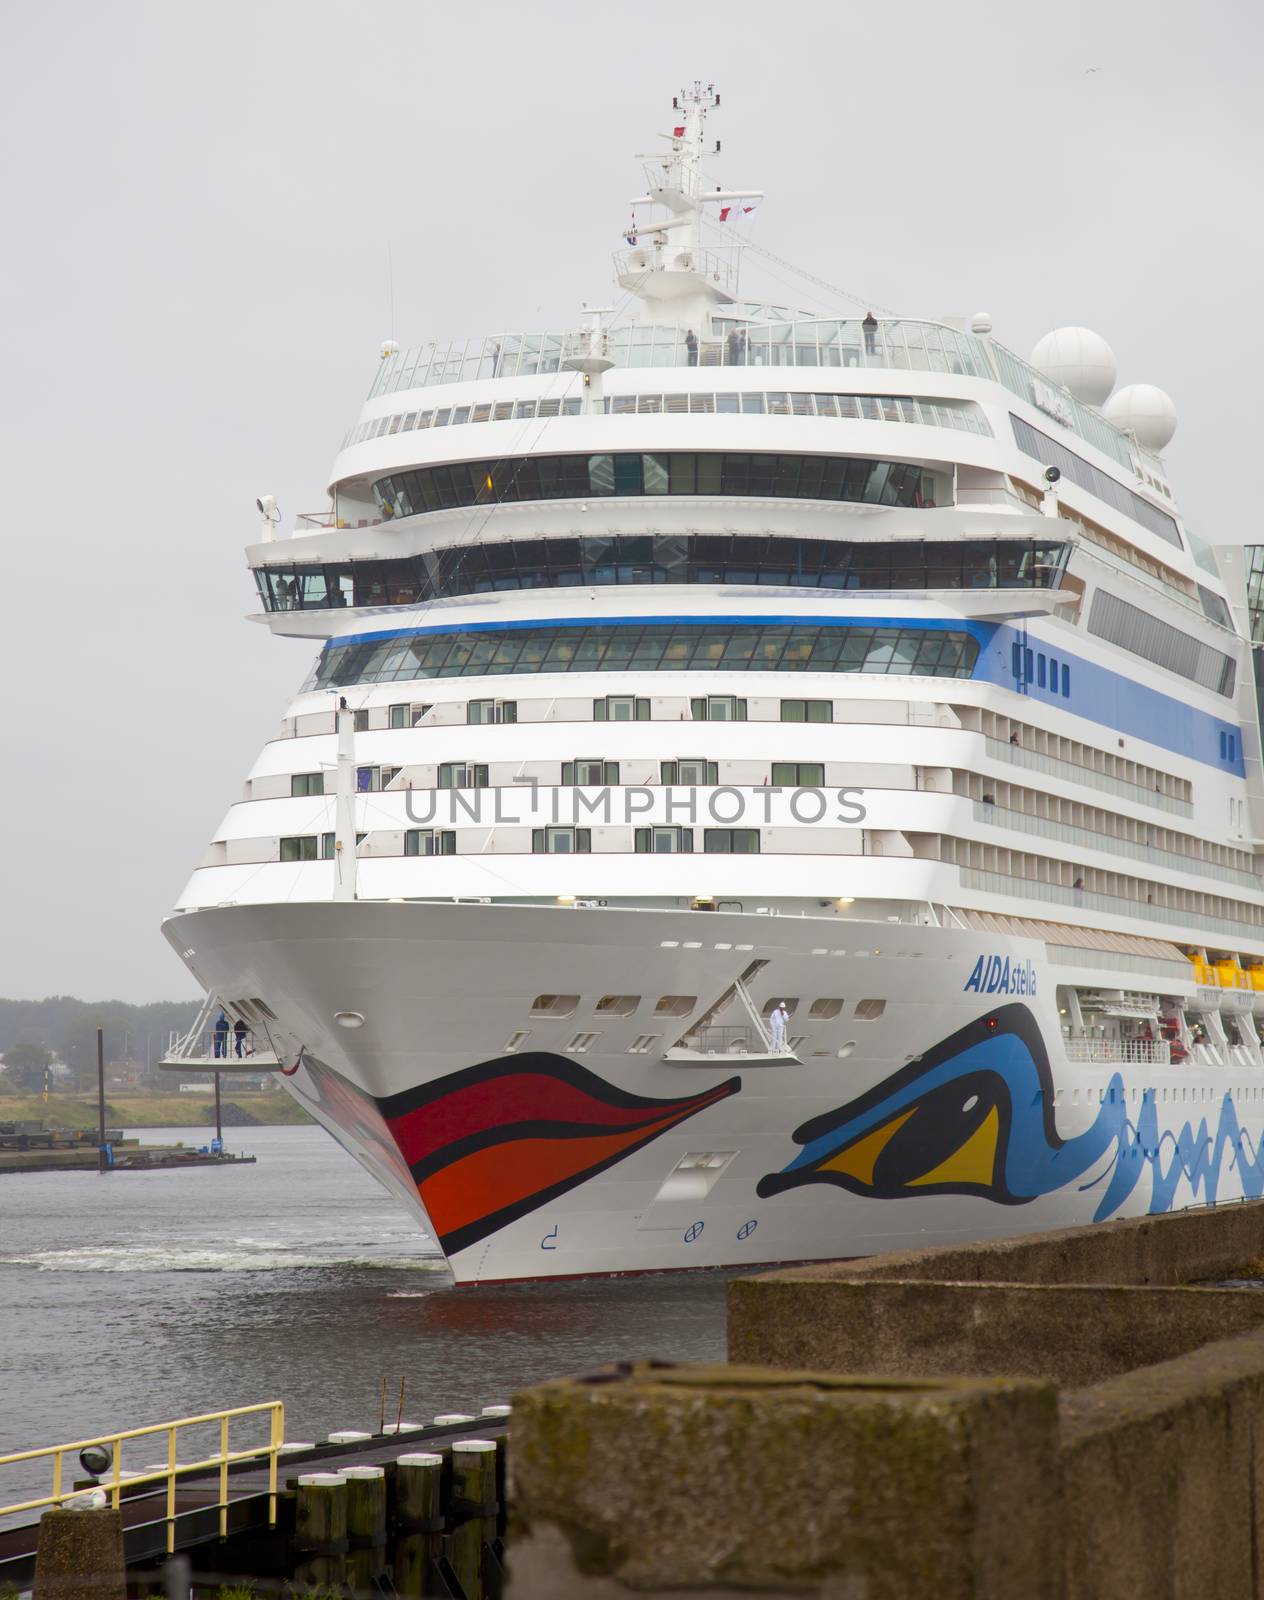 IJMUIDEN, THE NETHERLANDS - JULY 30, 2013: Cruise ship AIDA arrives at lock at IJmuiden, The Netherlands. Cruise ship AIDA is famous for the paintings of eyes and lips.